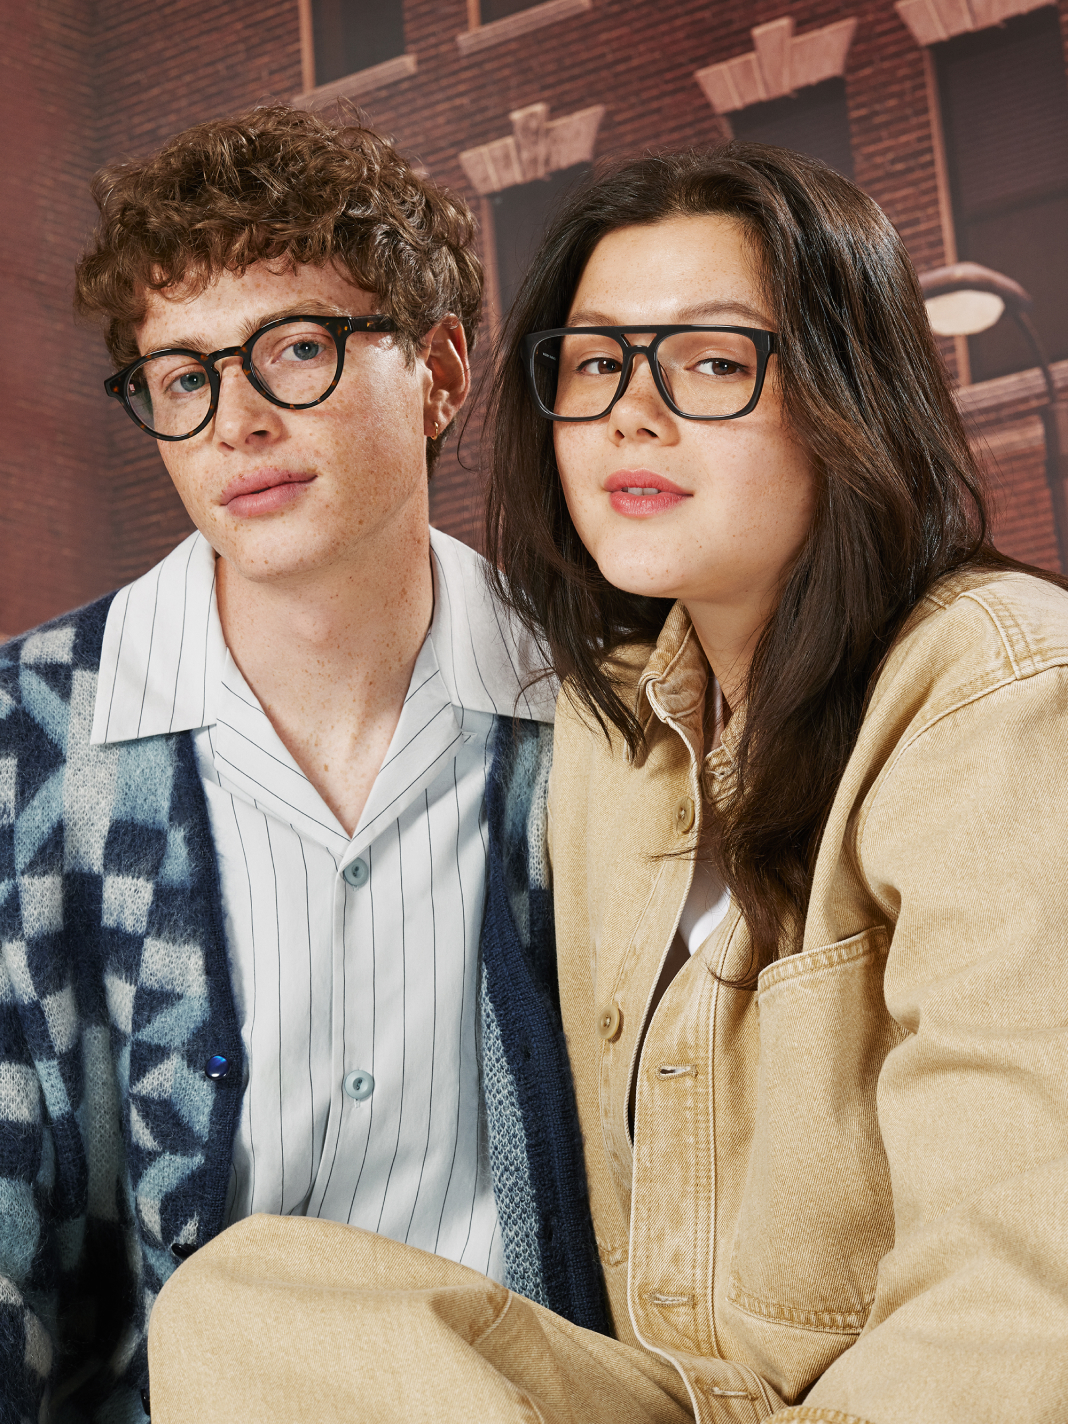 From left to right: Model wears the Peter Parker eyeglasses in Pumpernickel Tortoise, and model wears the Miles Morales eyeglasses in Shadow.